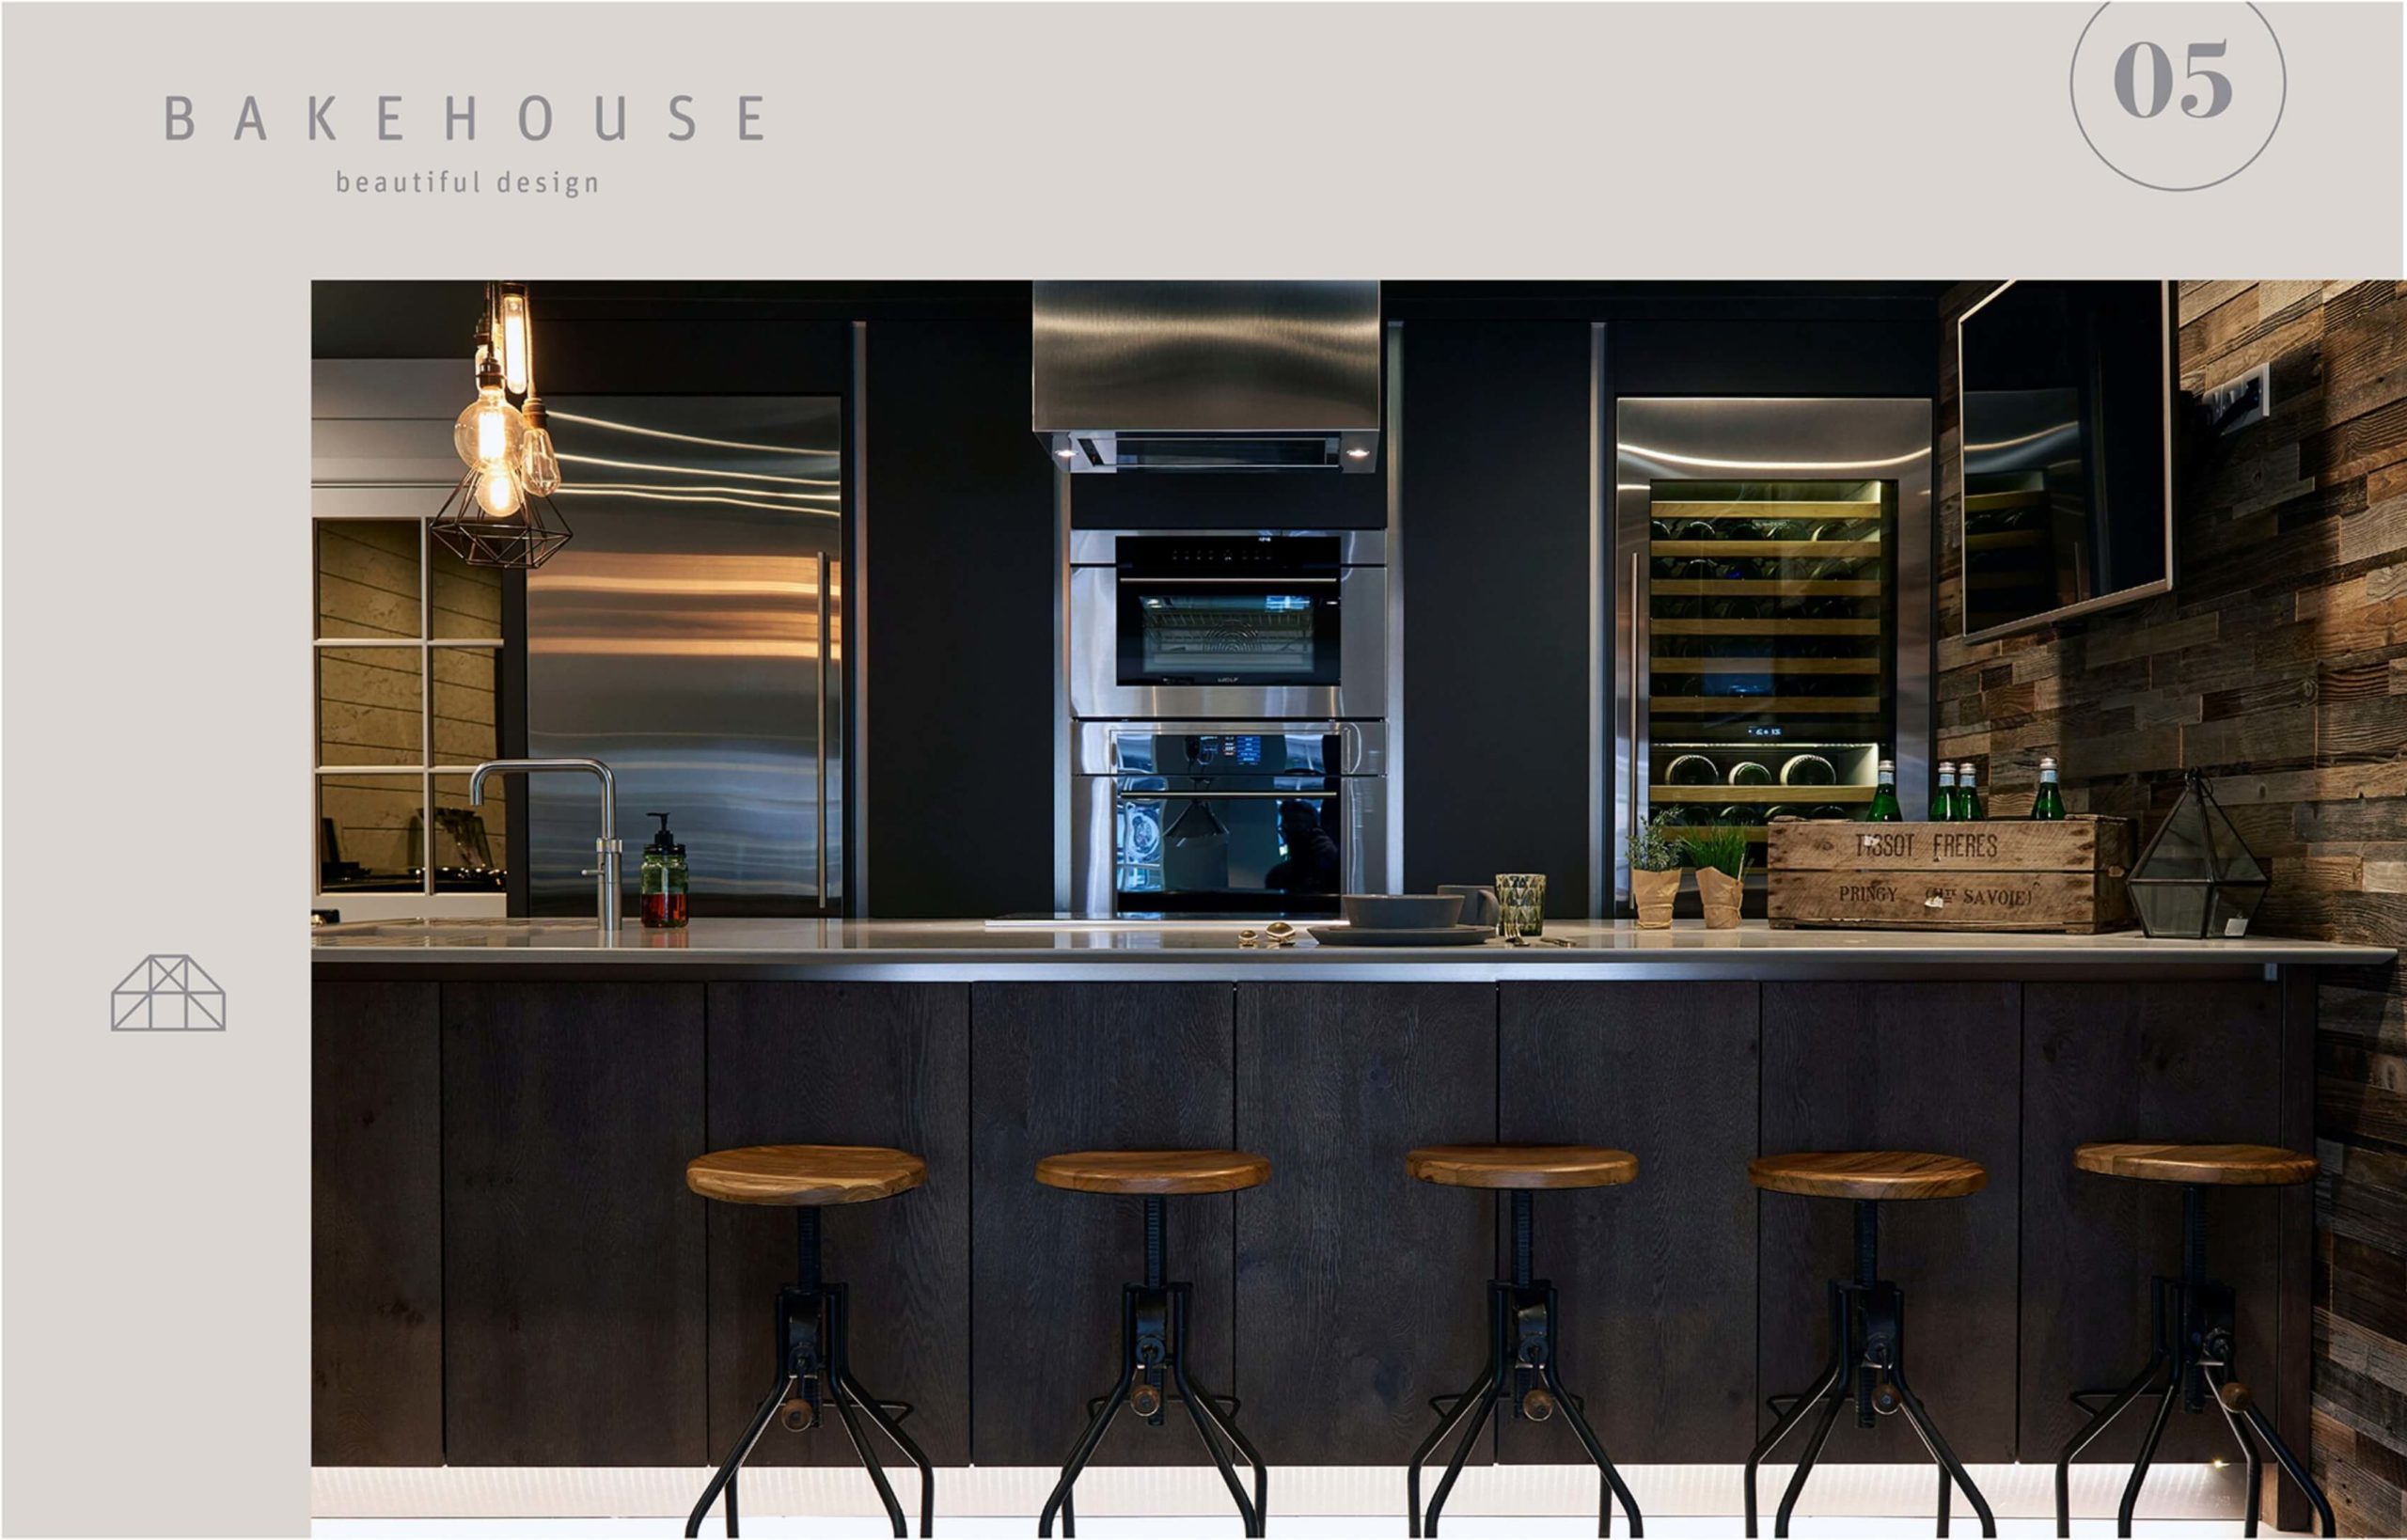 Brand layout examples for luxury kitchen brand identity, Bakehouse Kitchens